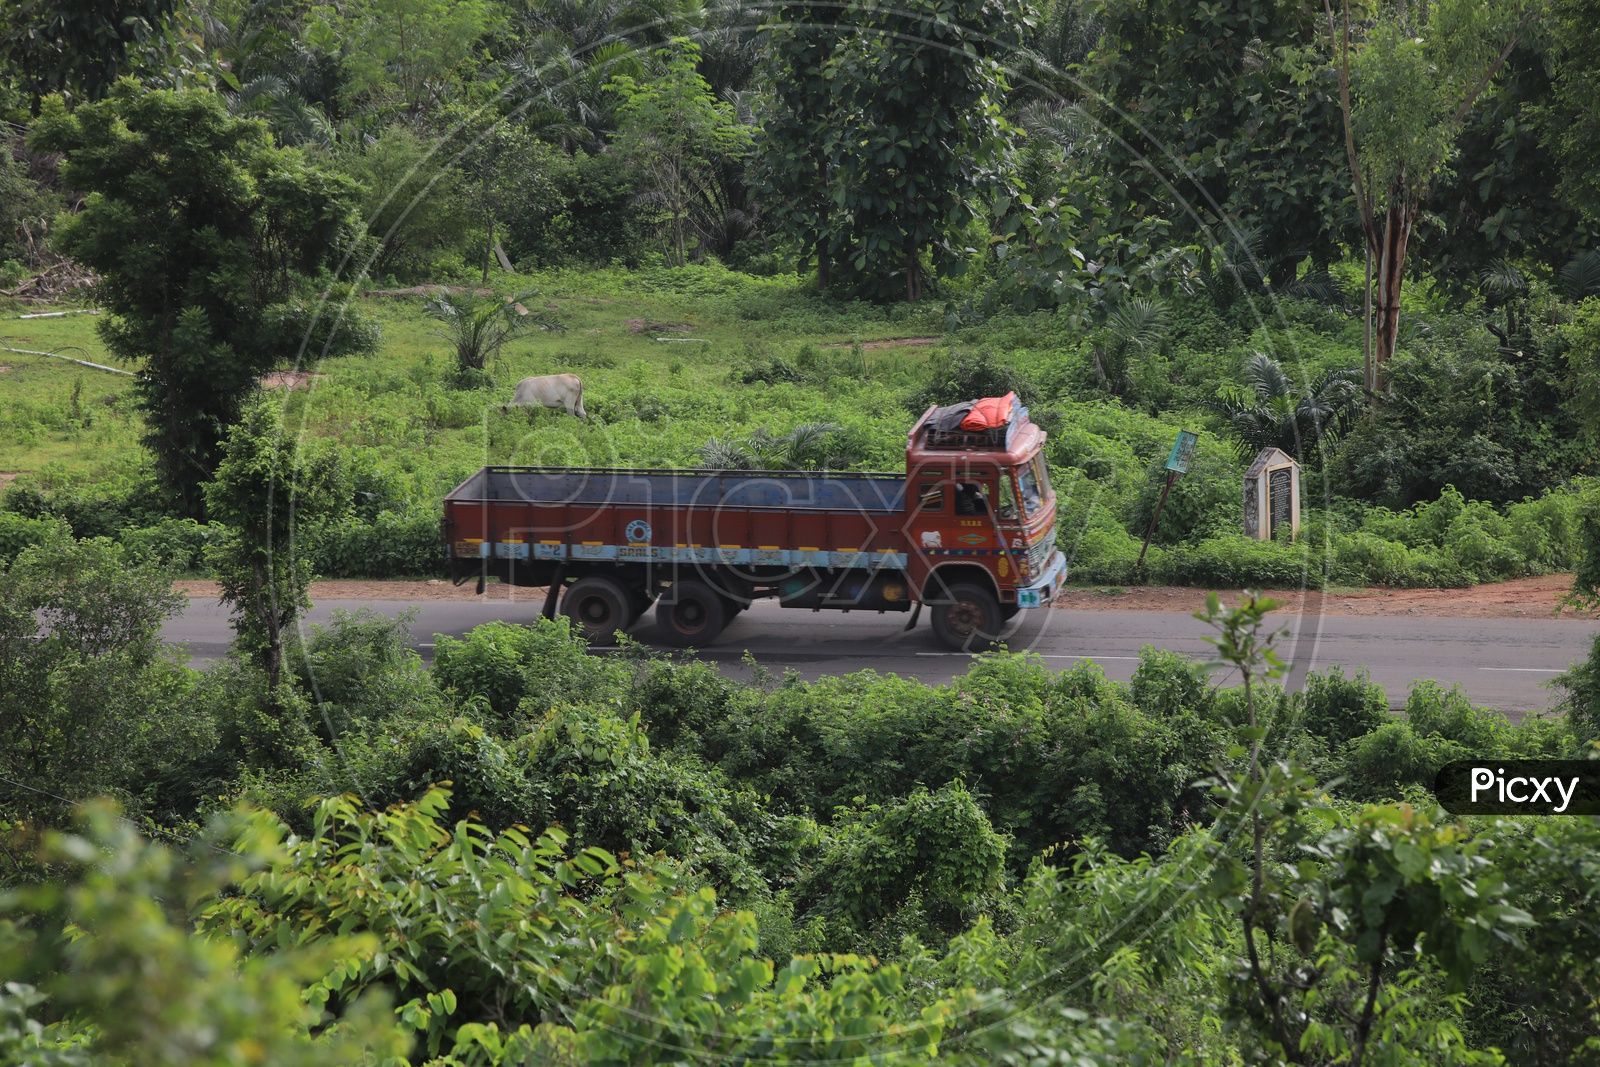 Heavy Transportation Truck Or Lorry Running On Terrain Roads At Rural Areas